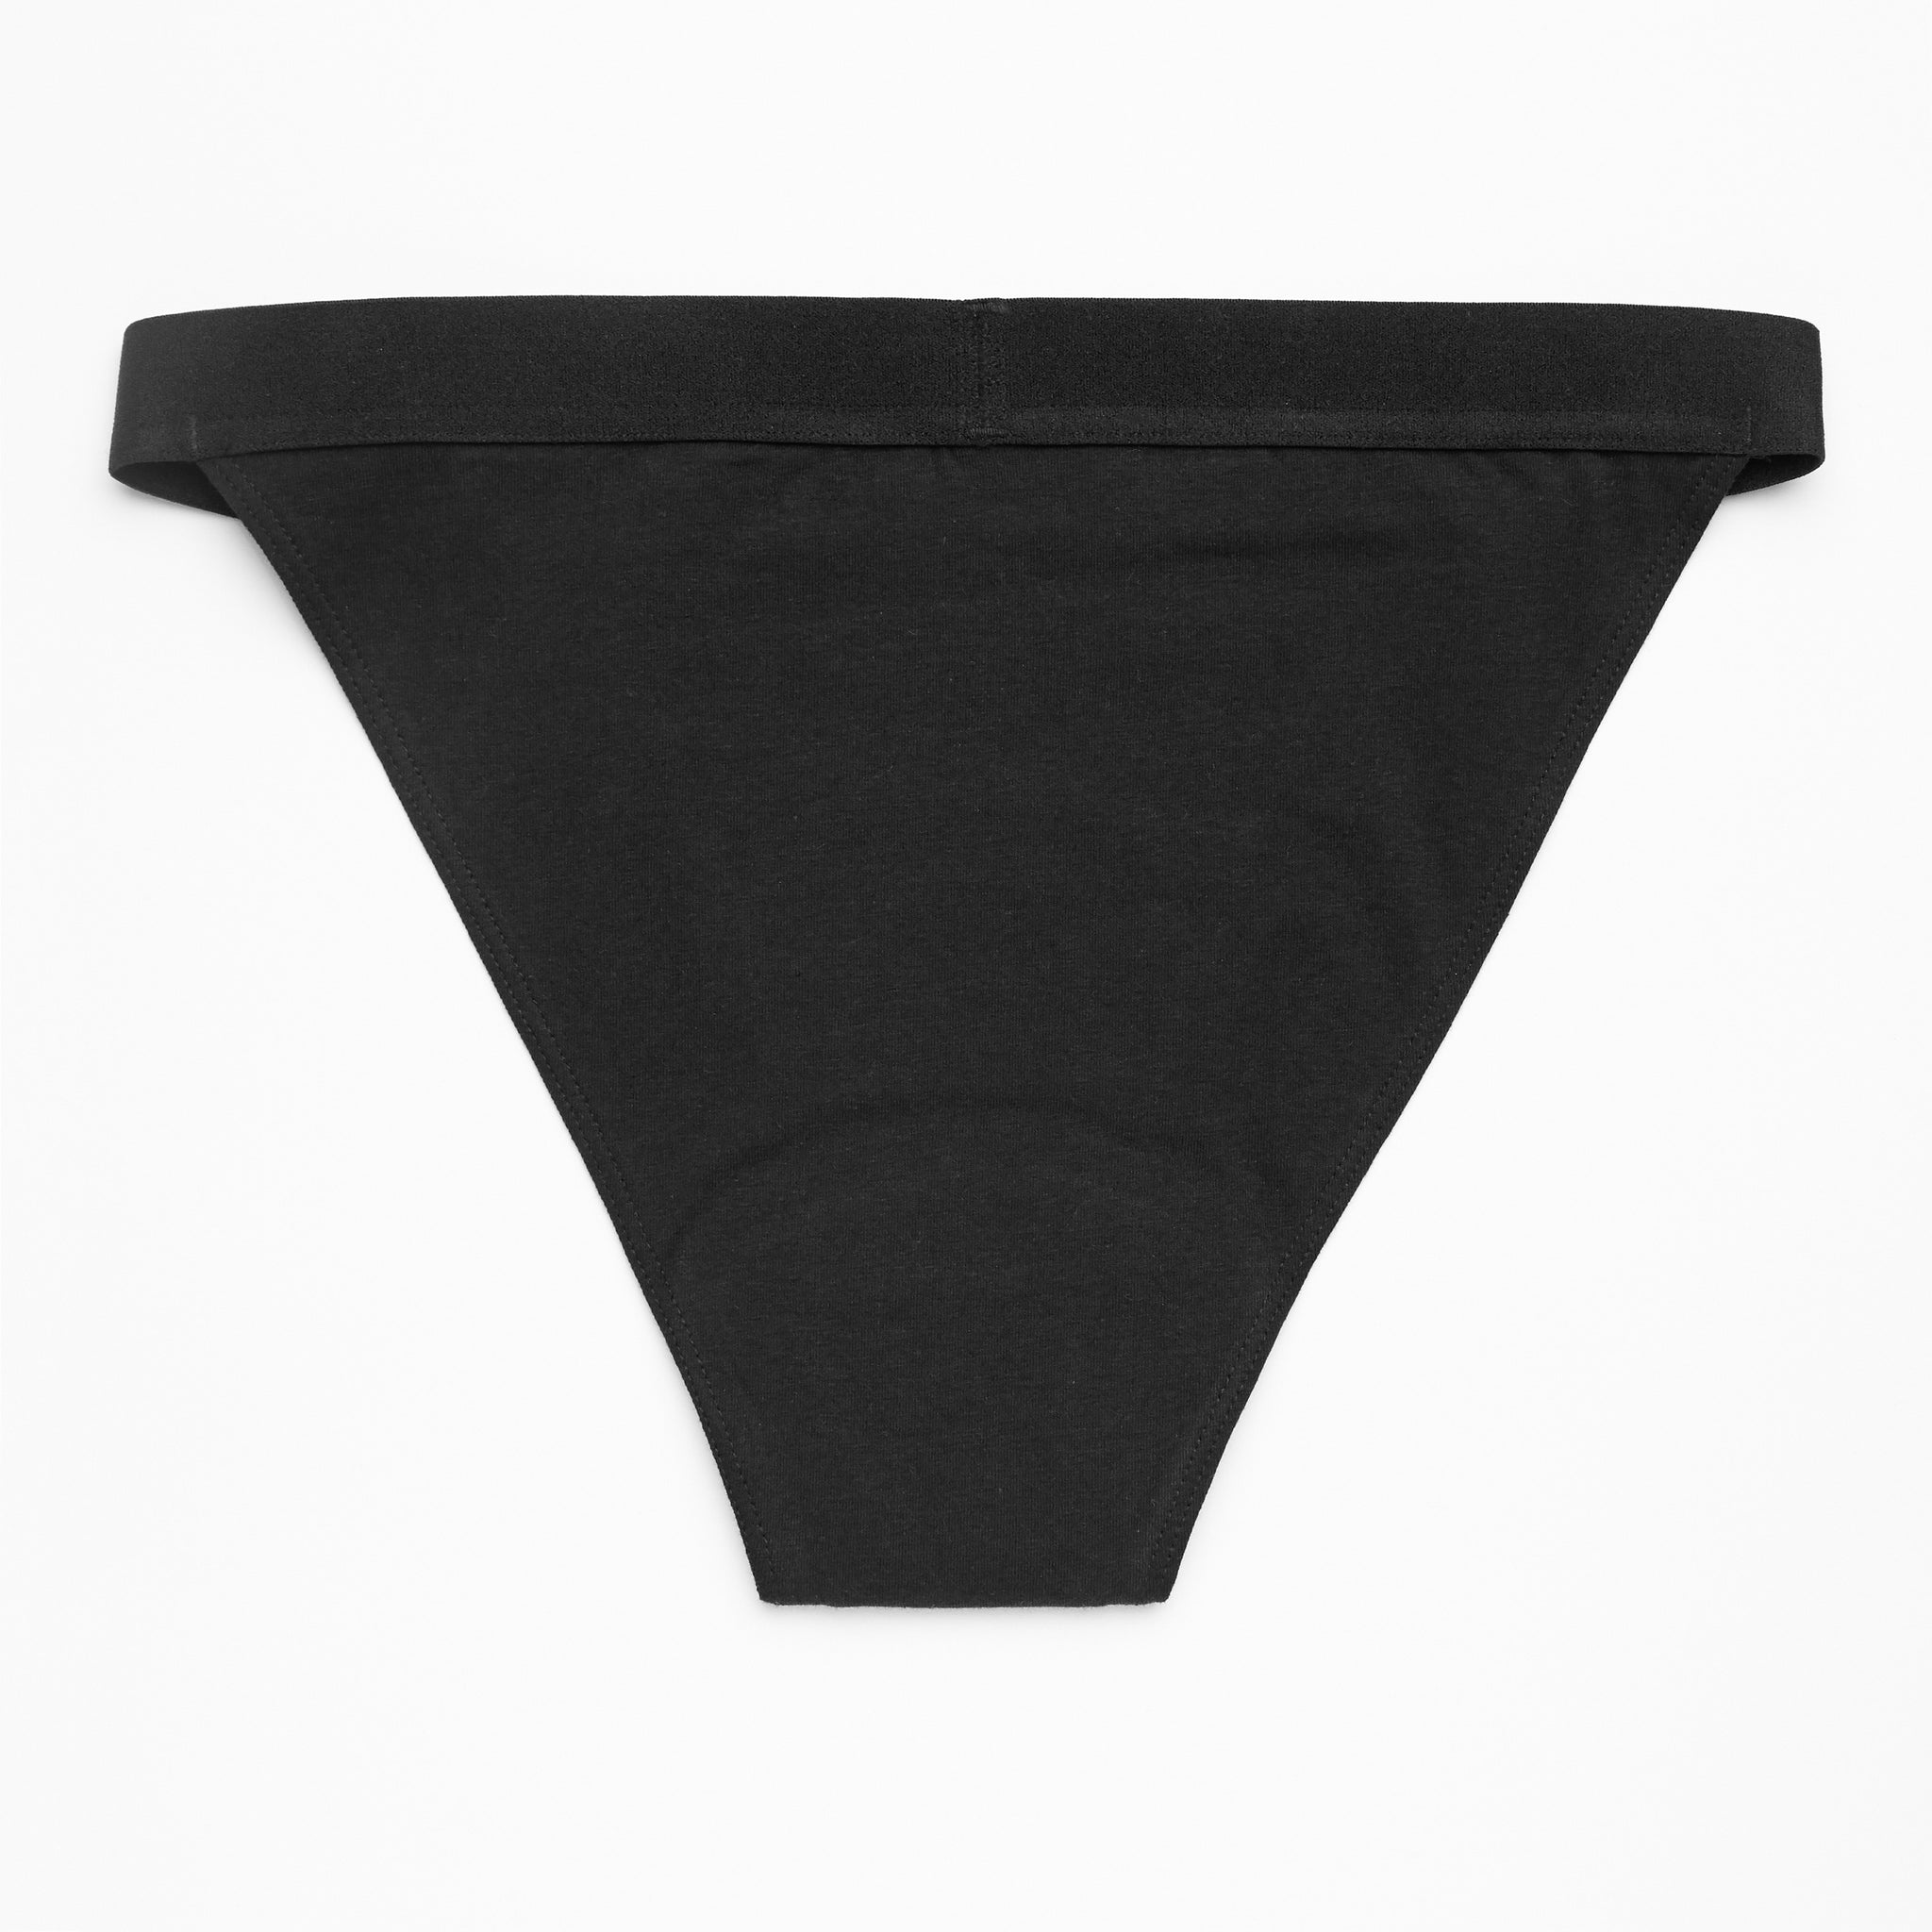 Period Pants  Organic Period Knickers - DAME